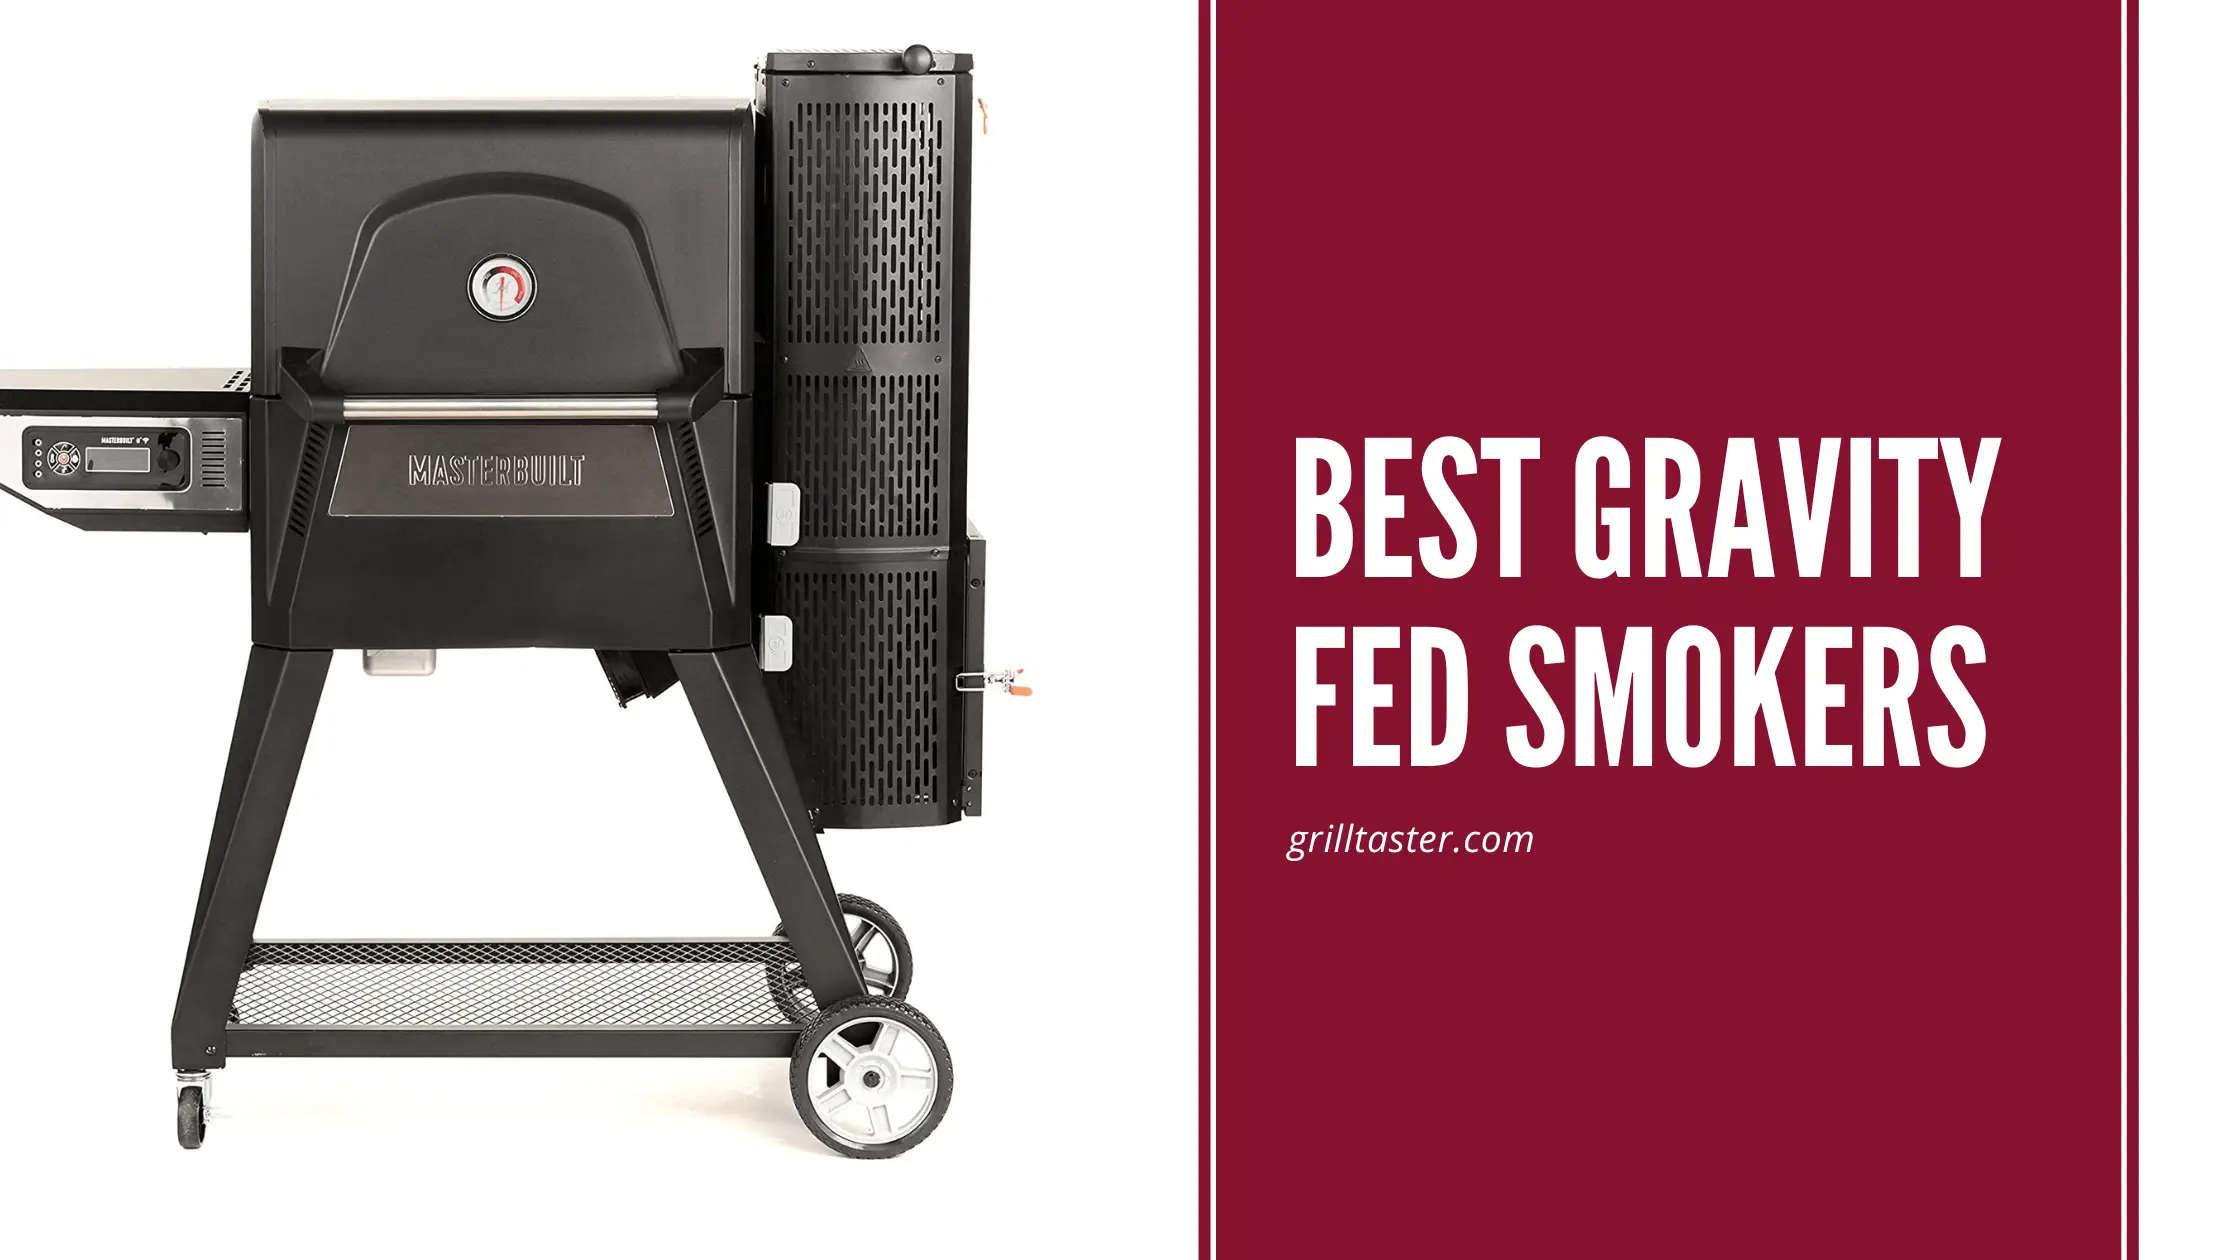 Best Gravity Fed Smokers